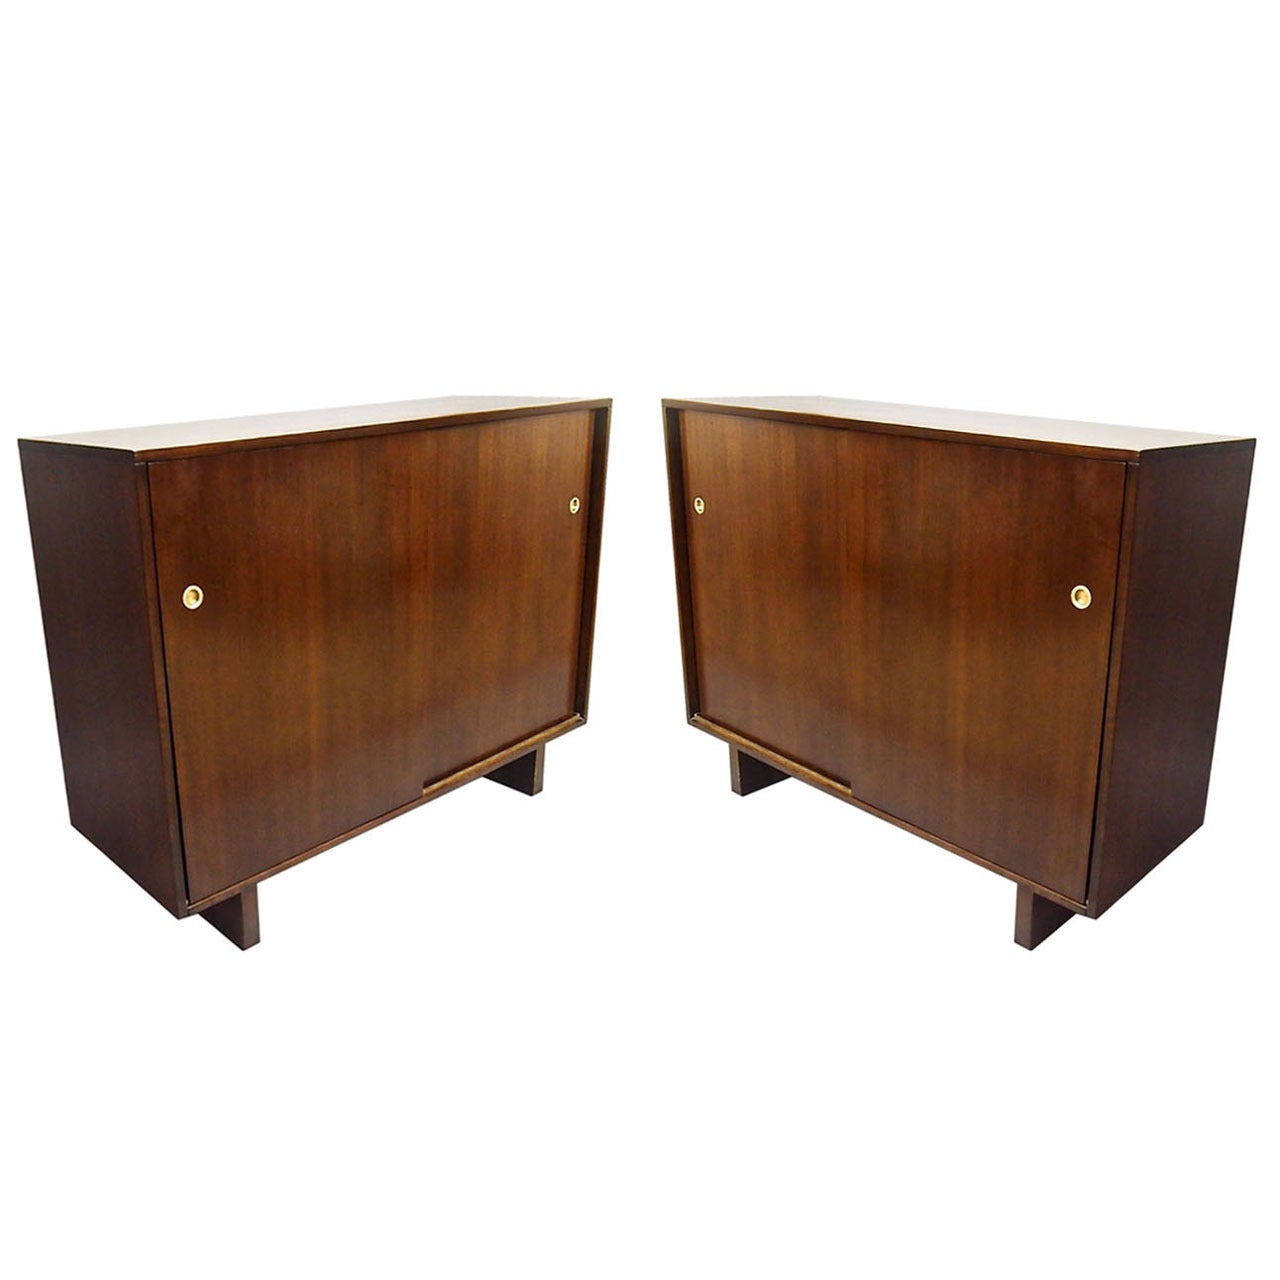 Pair of His and Hers Dressers by Widdicomb 1949, USA